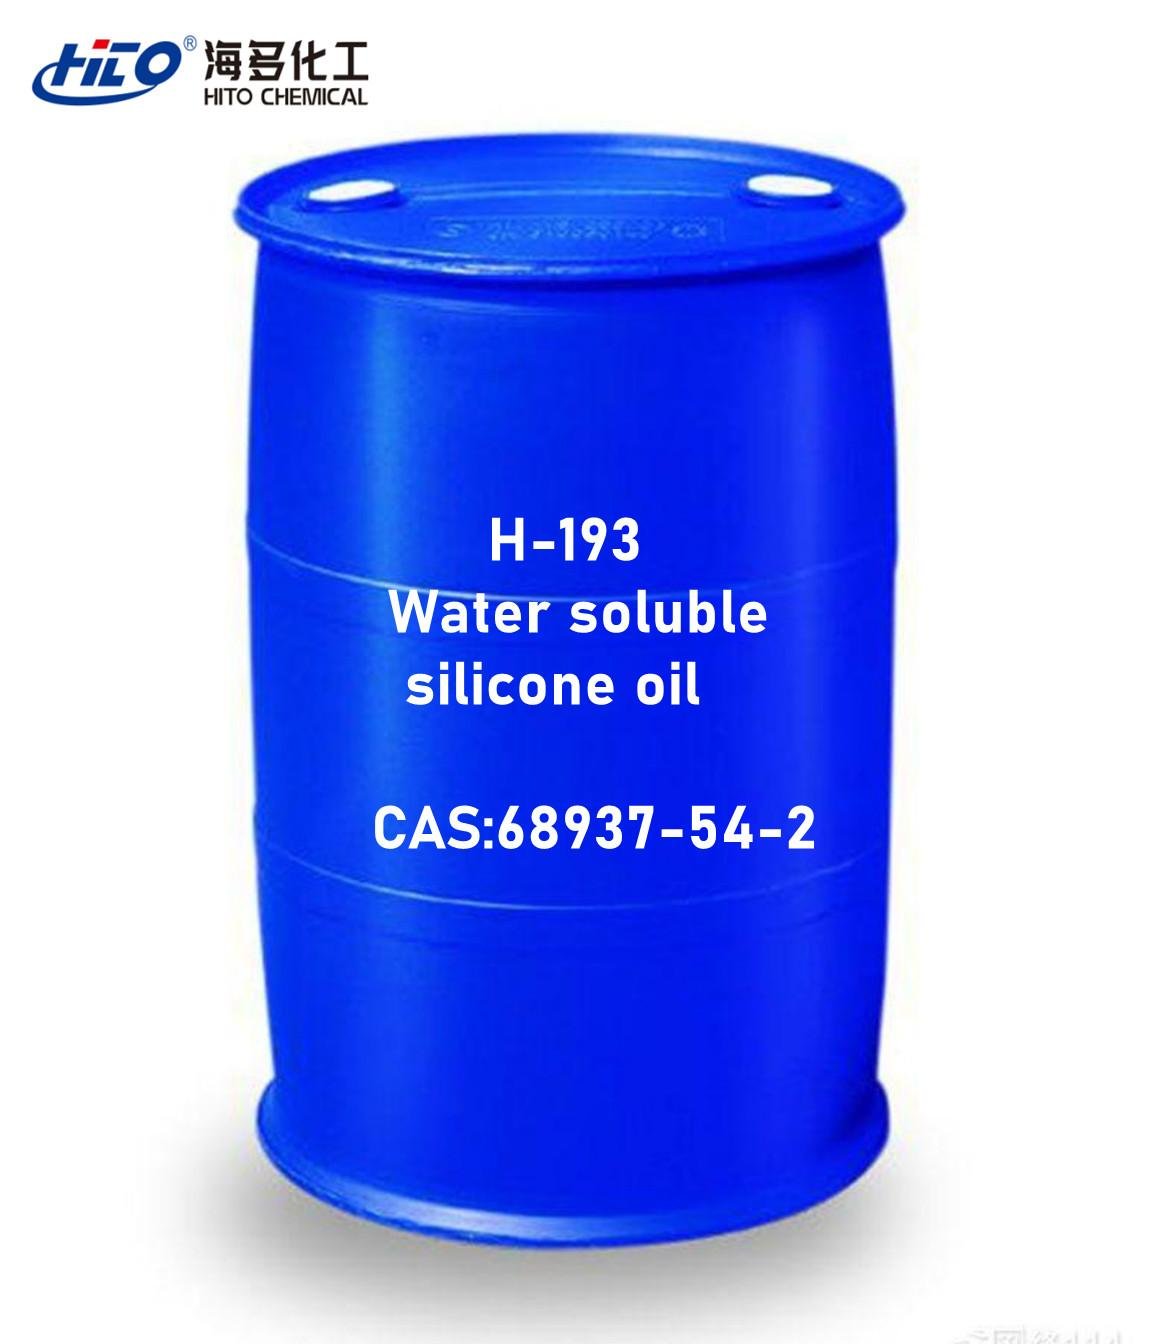 H-193 Water soluble silicone oil